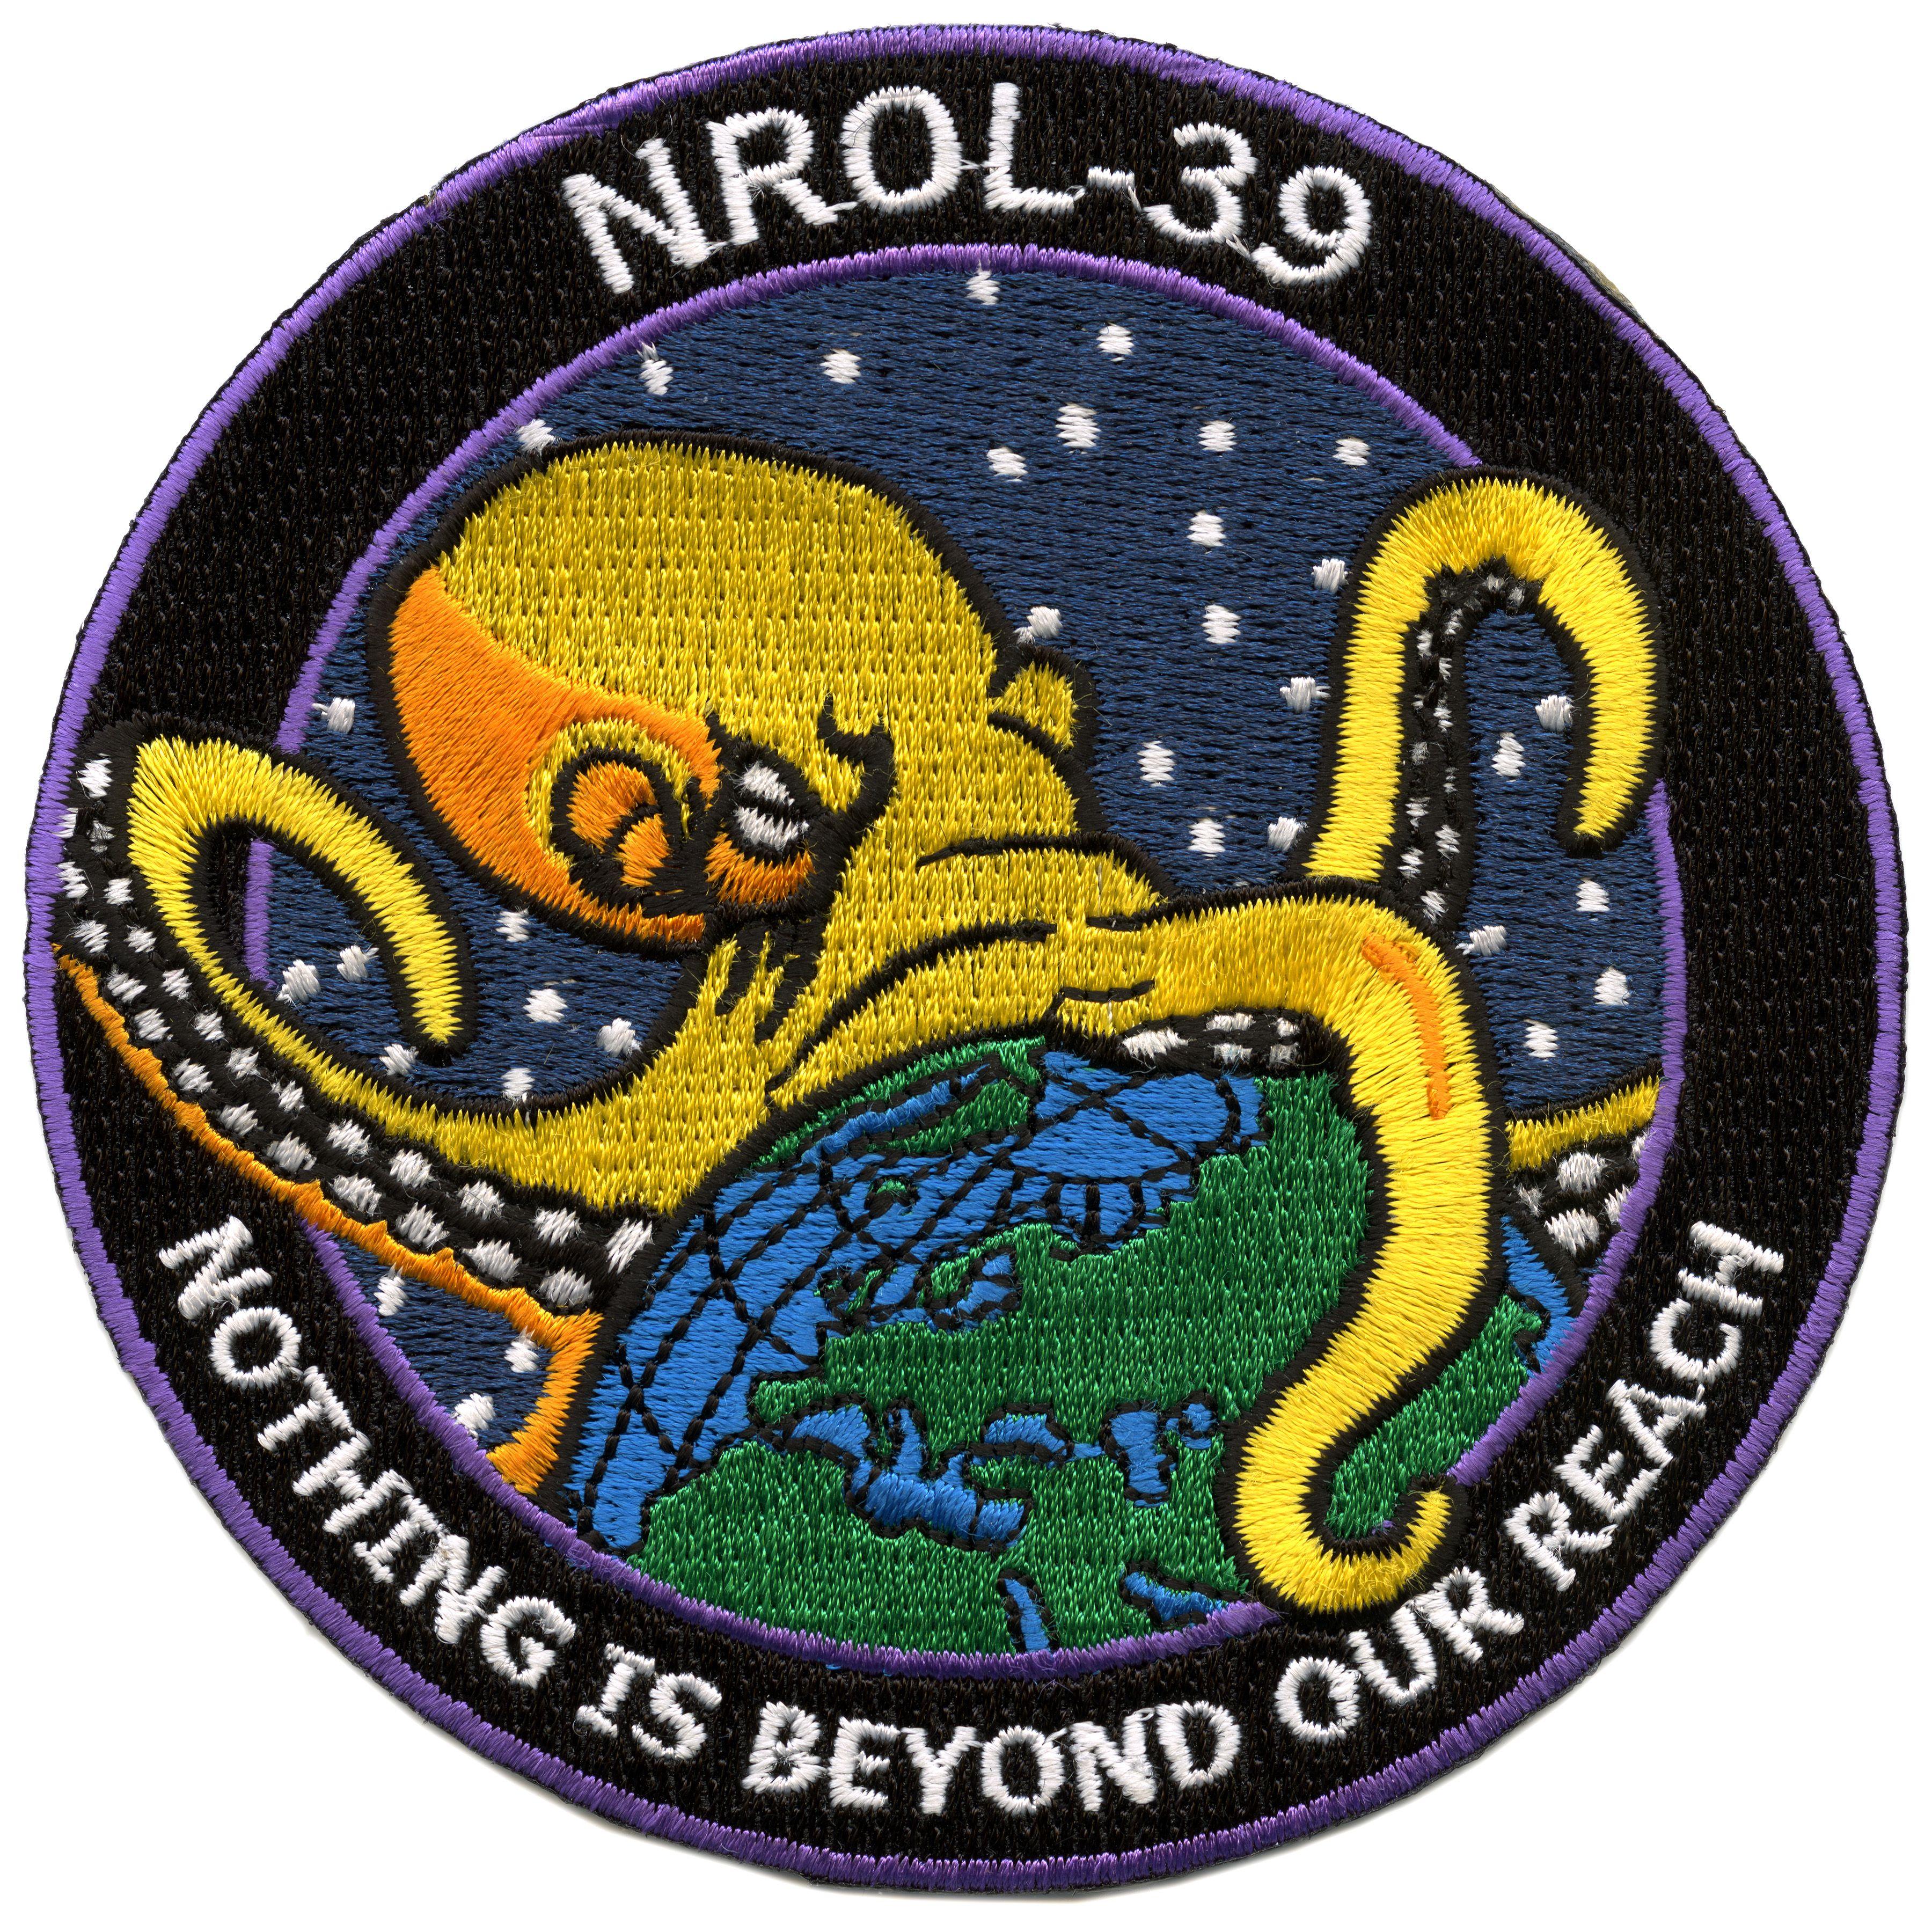 Old NRO Logo - List of NRO launches